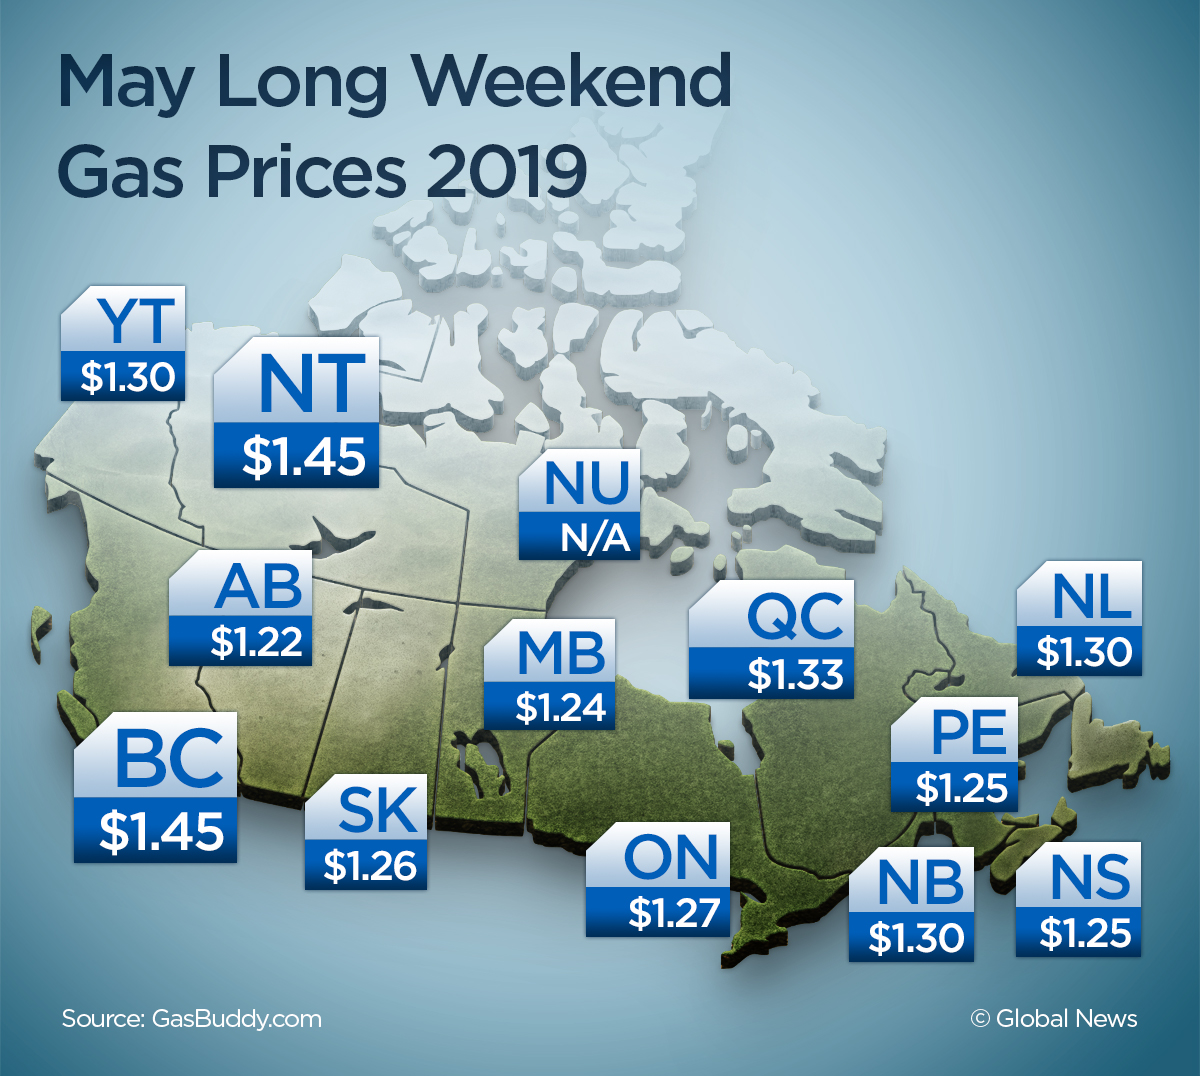 Feeling the pinch at the pump? What gas prices to expect across Canada